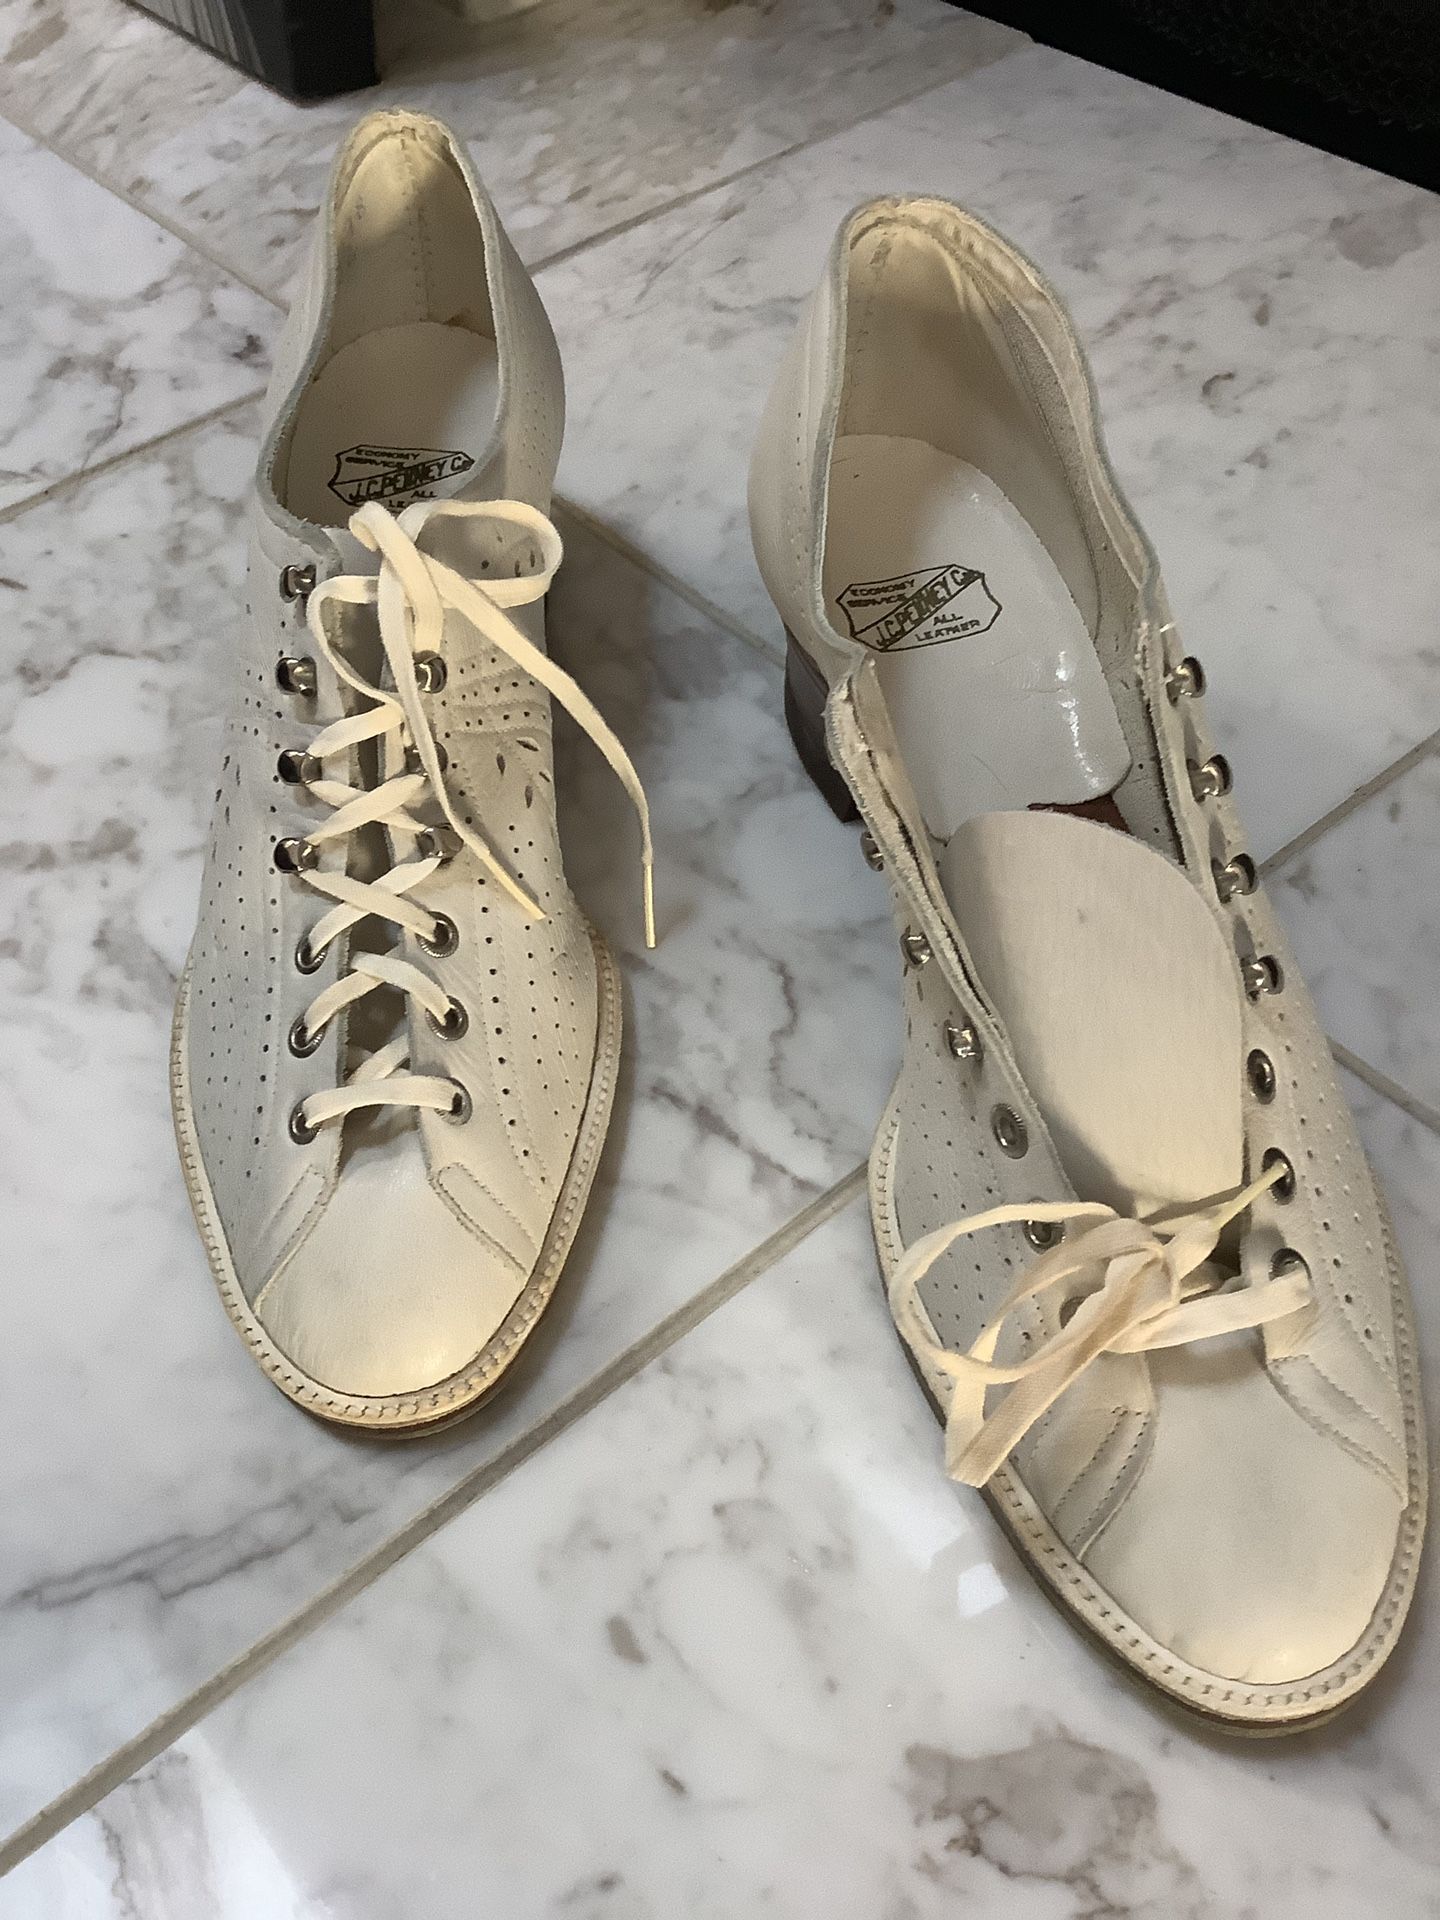 VINTAGE Lace Up Shoes by JCPenney co size 8